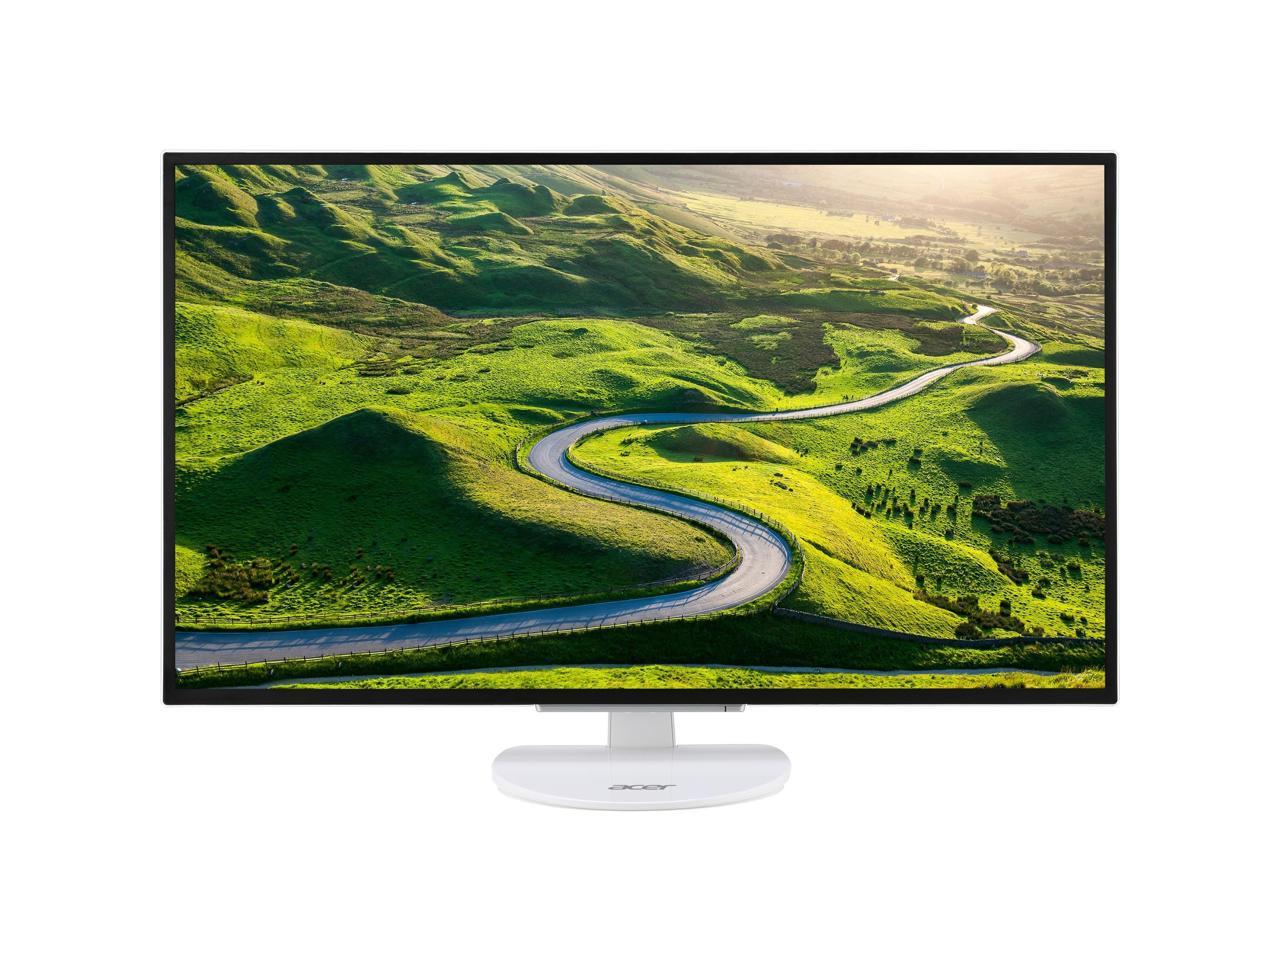 Acer ER320HQ 31.5″ 1080p IPS LED monitor with 4ms Response Time